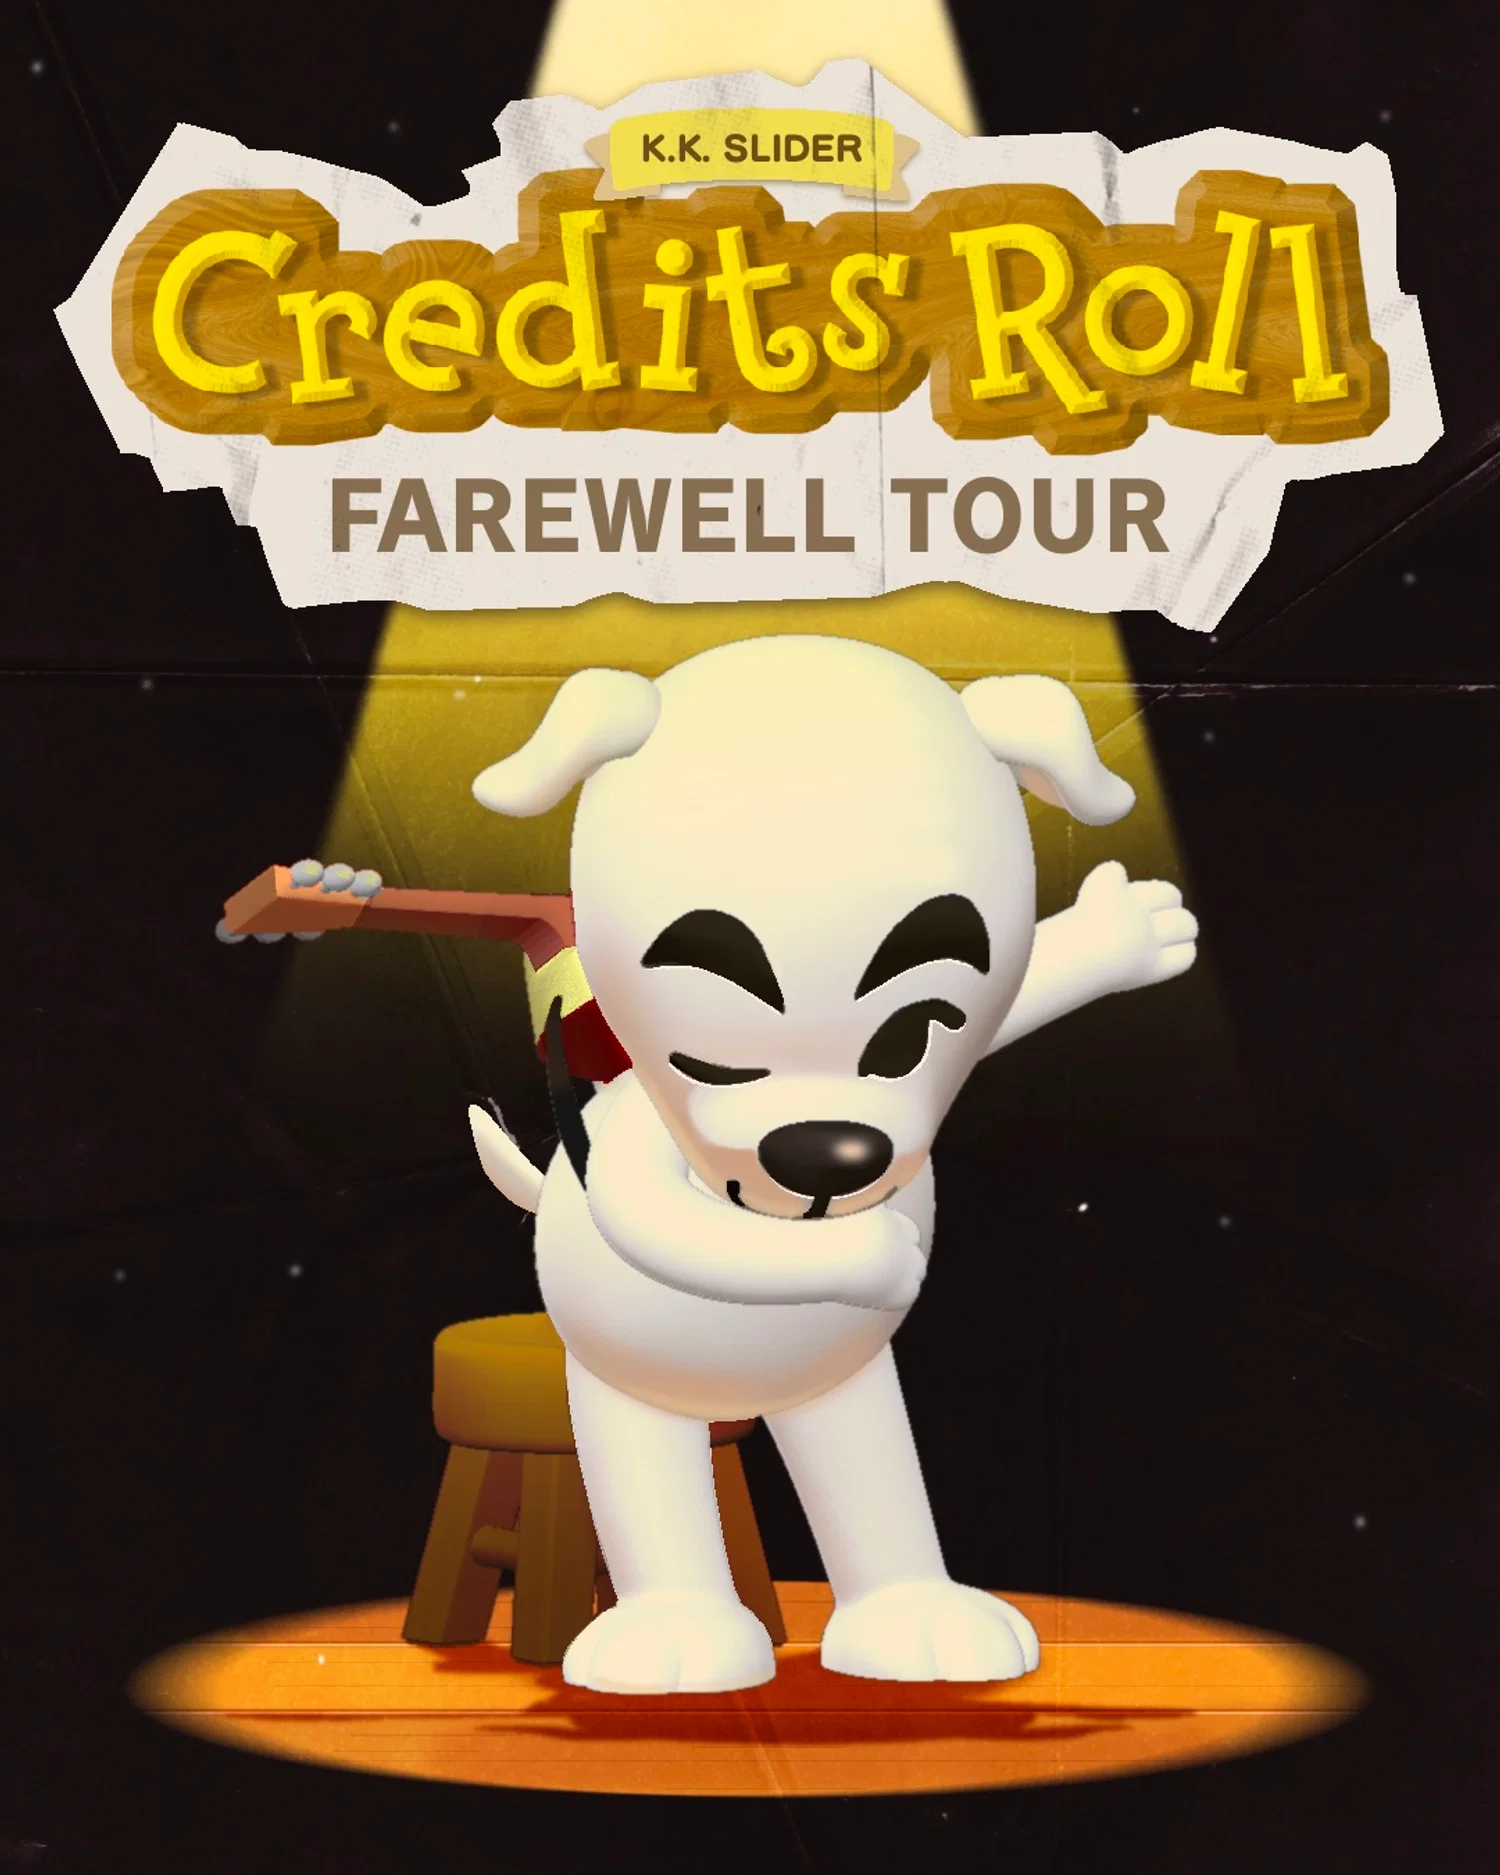 A hypothetical farewell concert poster featuring K.K. Slider from Animal Crossing. 